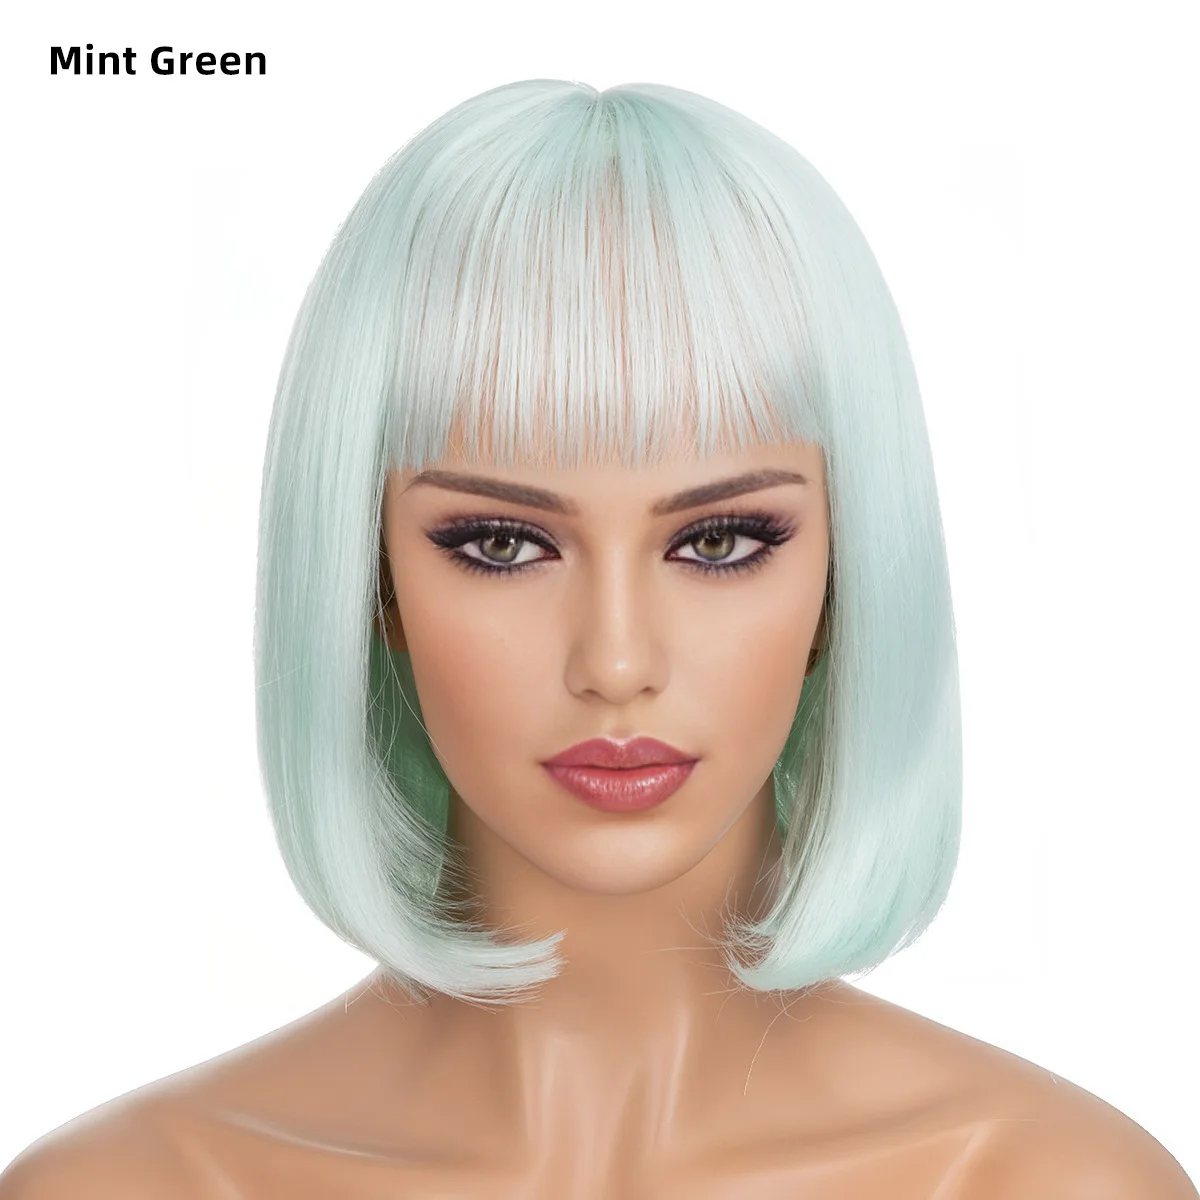 

Mint Green Short Bob Wig With Bangs Synthetic Wigs For Women Ombre Hot Pink Lolita Cosplay Party Natural Hair Perruque Bob